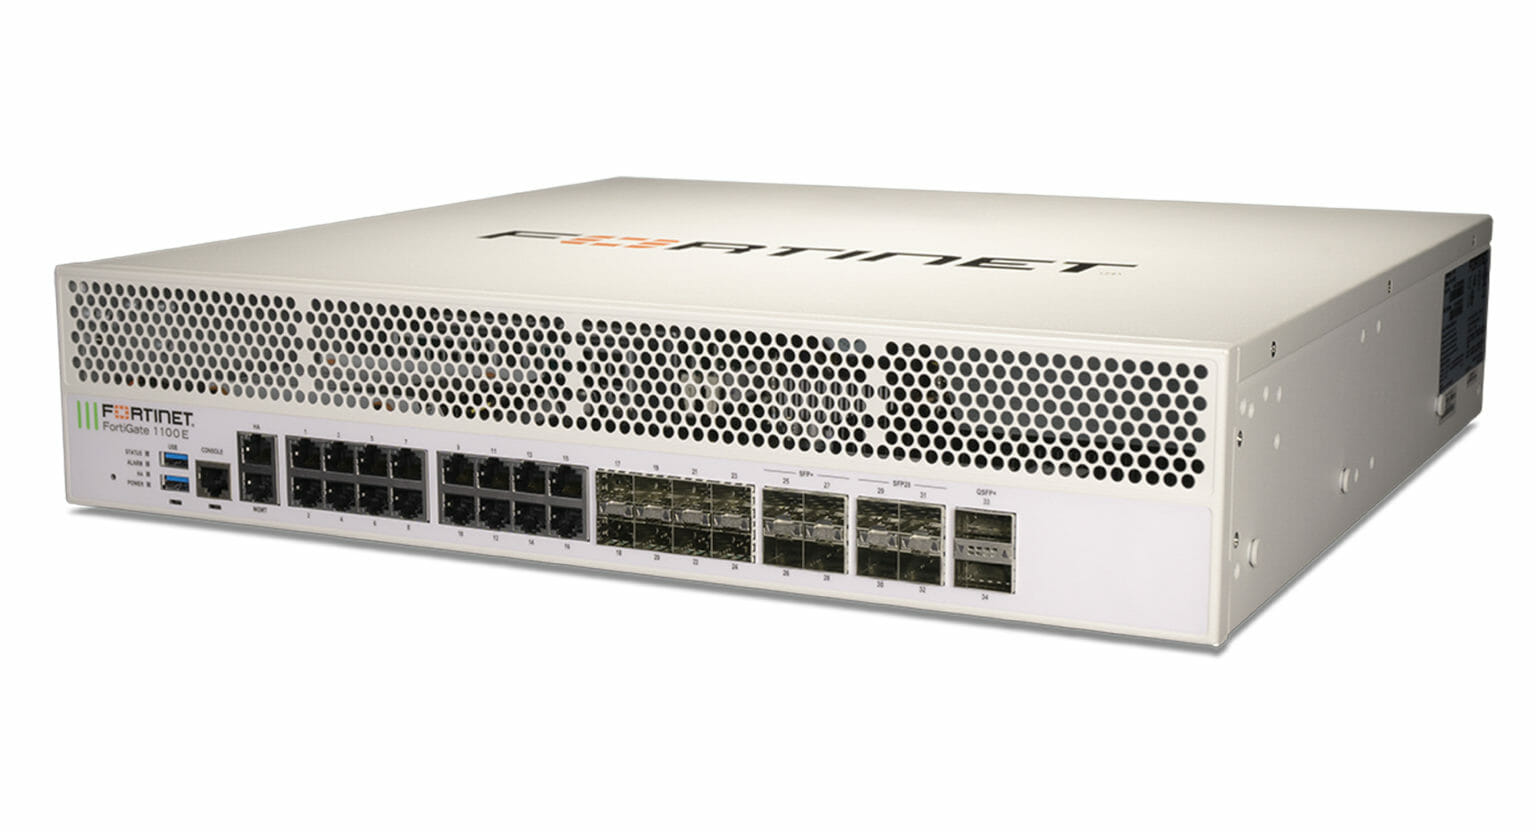 Fortinet product review standard multilayer software image cisco